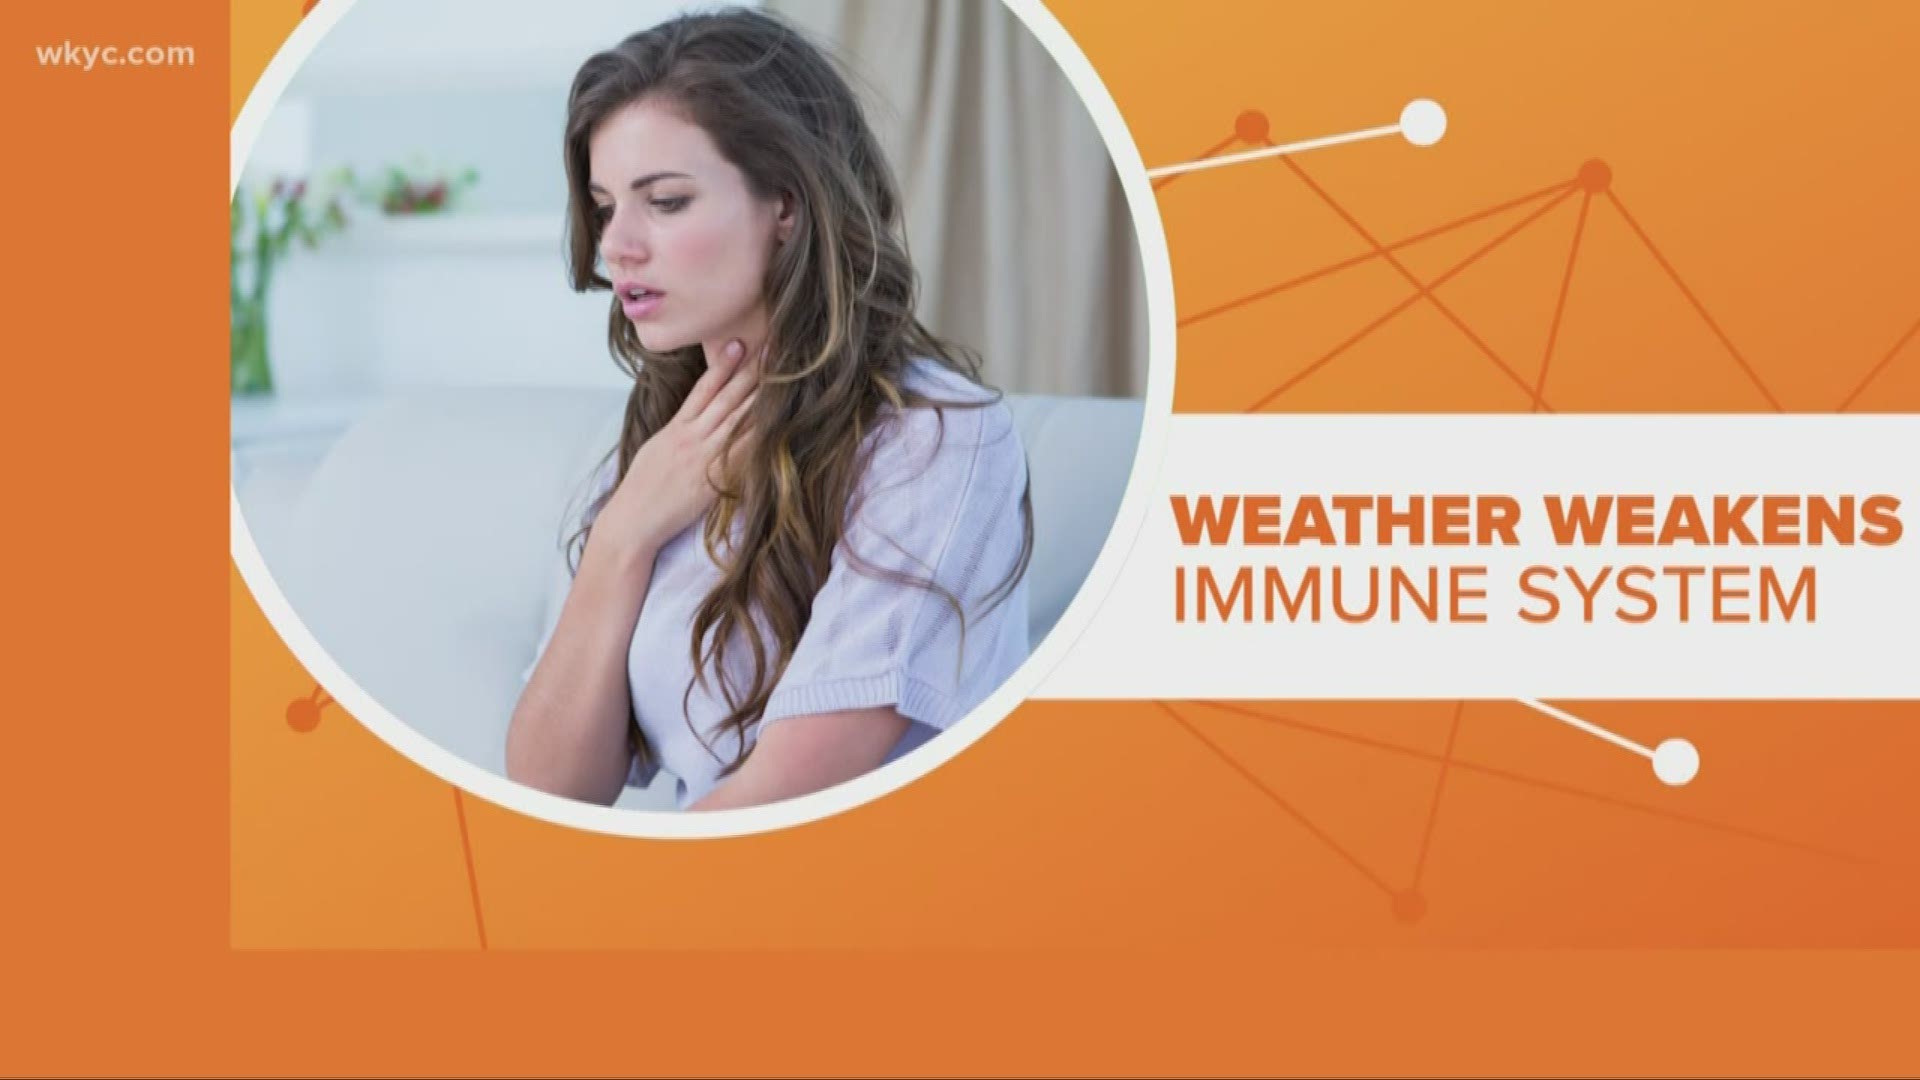 Is it true that weather changes can make you sick? We're connecting the dots to find the truth.